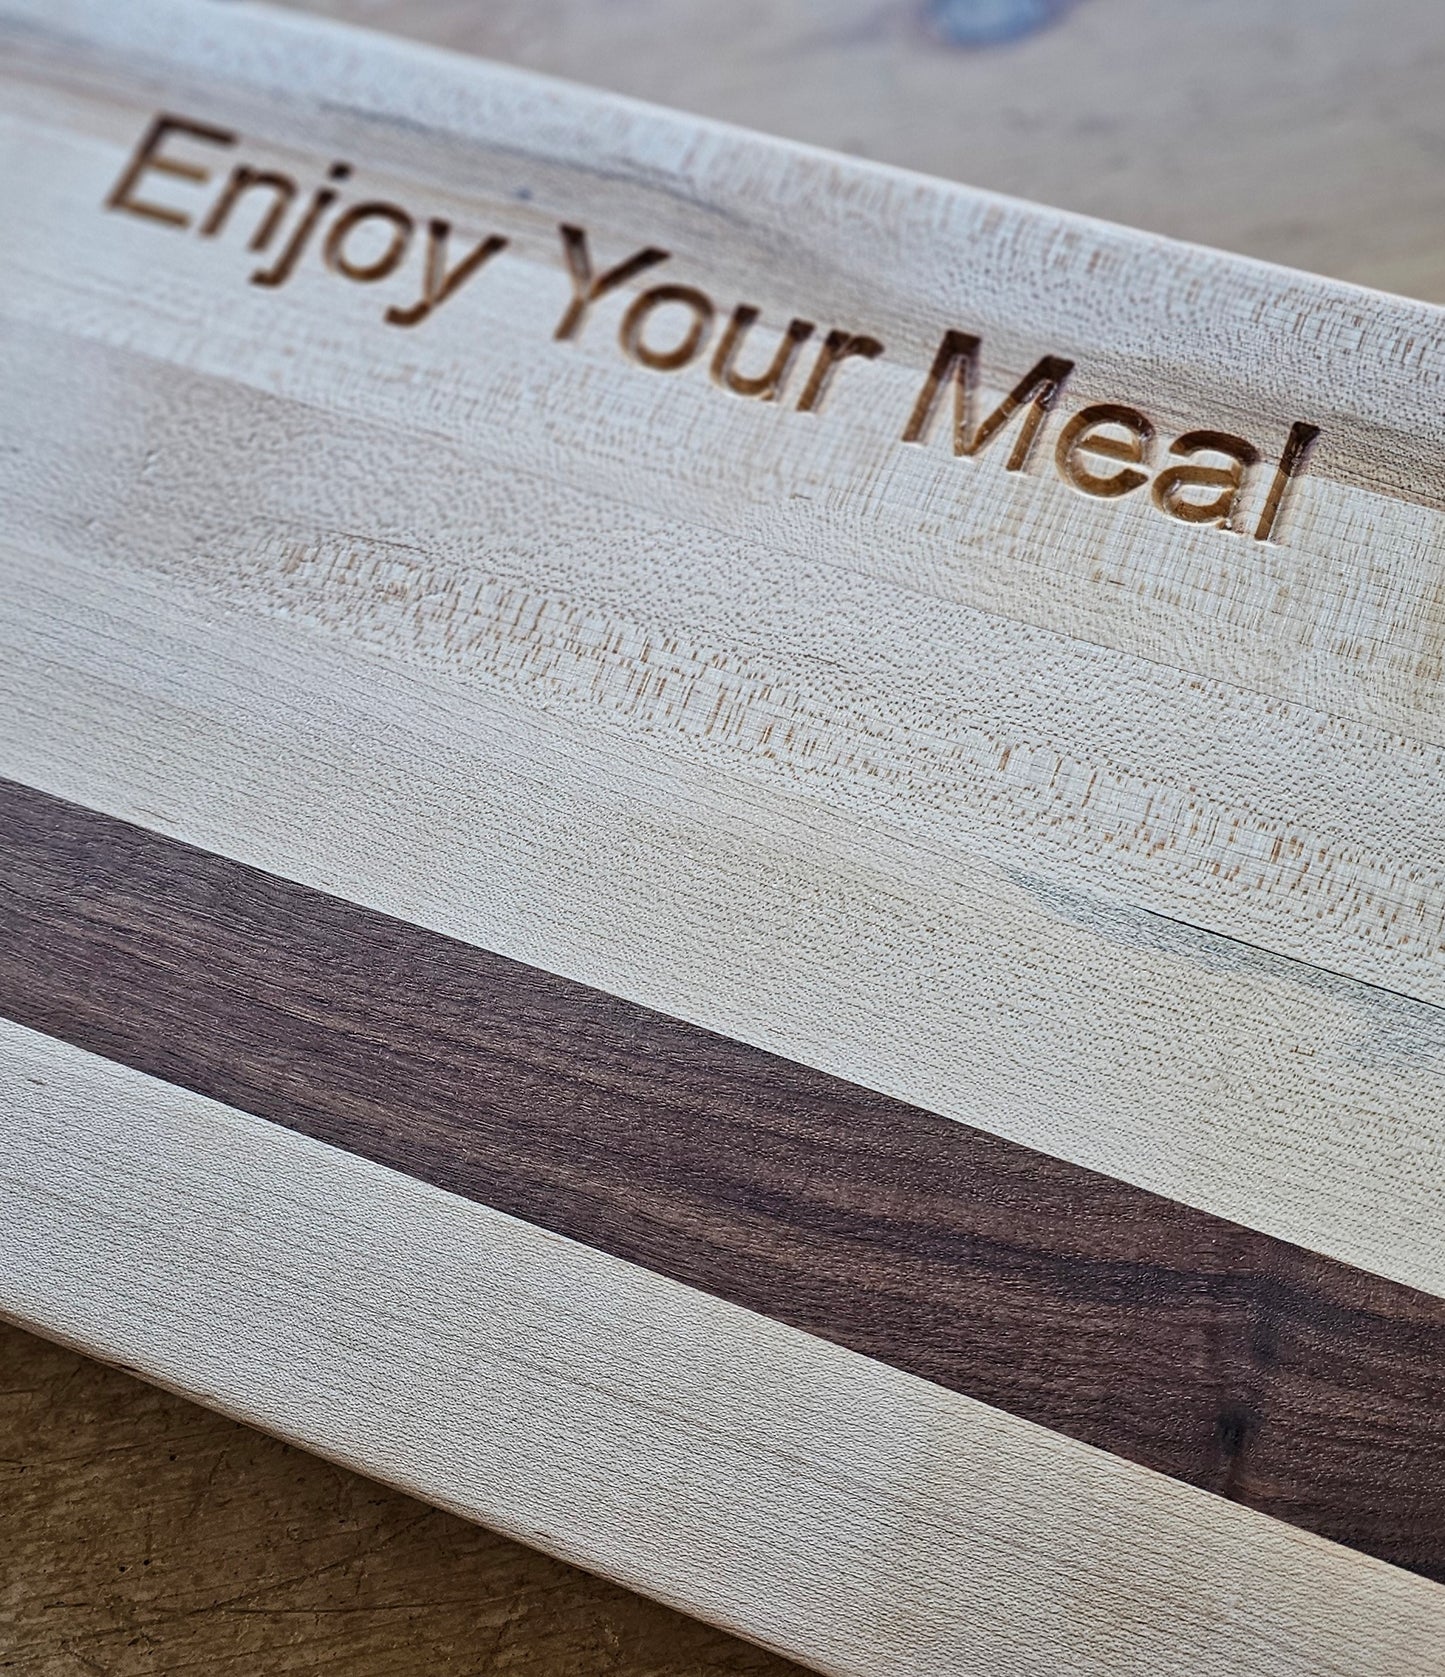 Doodleware Cutting Boards - Bon Appetit in English